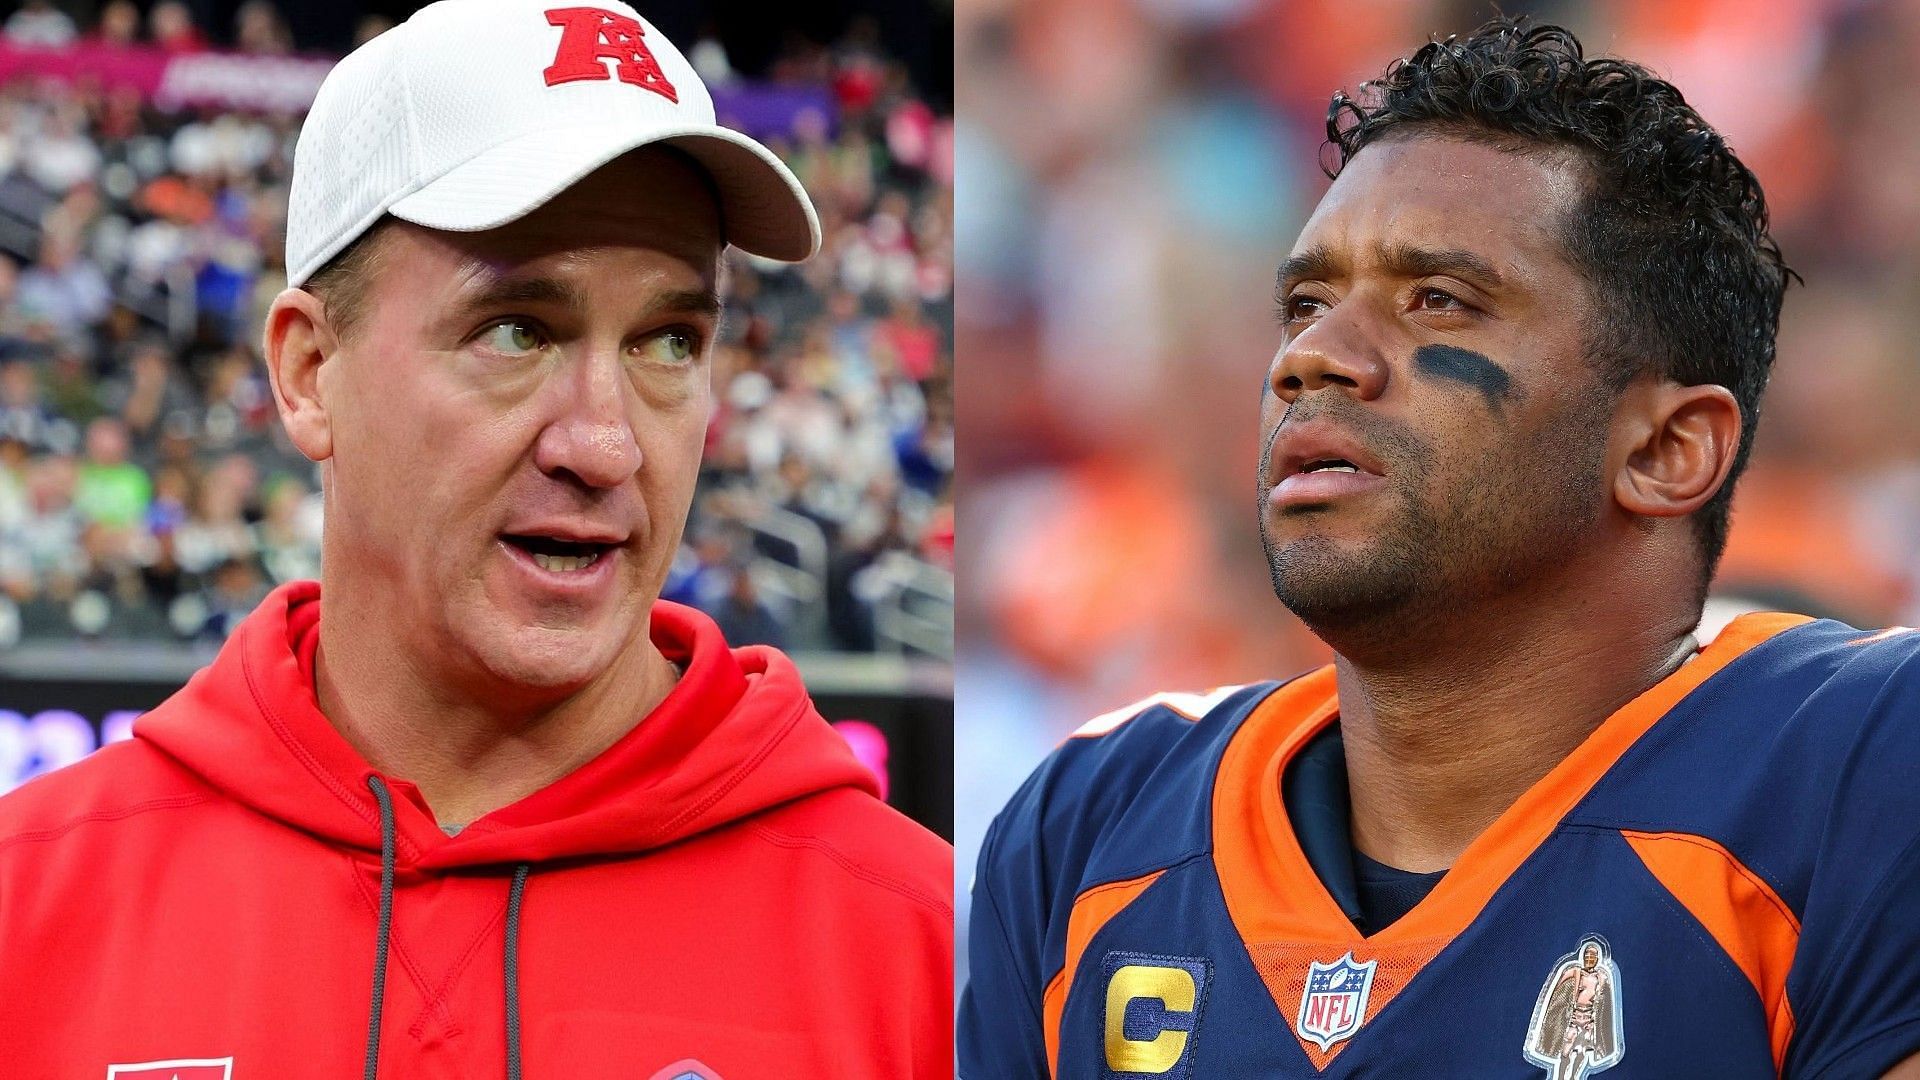 Which of Peyton Manning or Russell Wilson